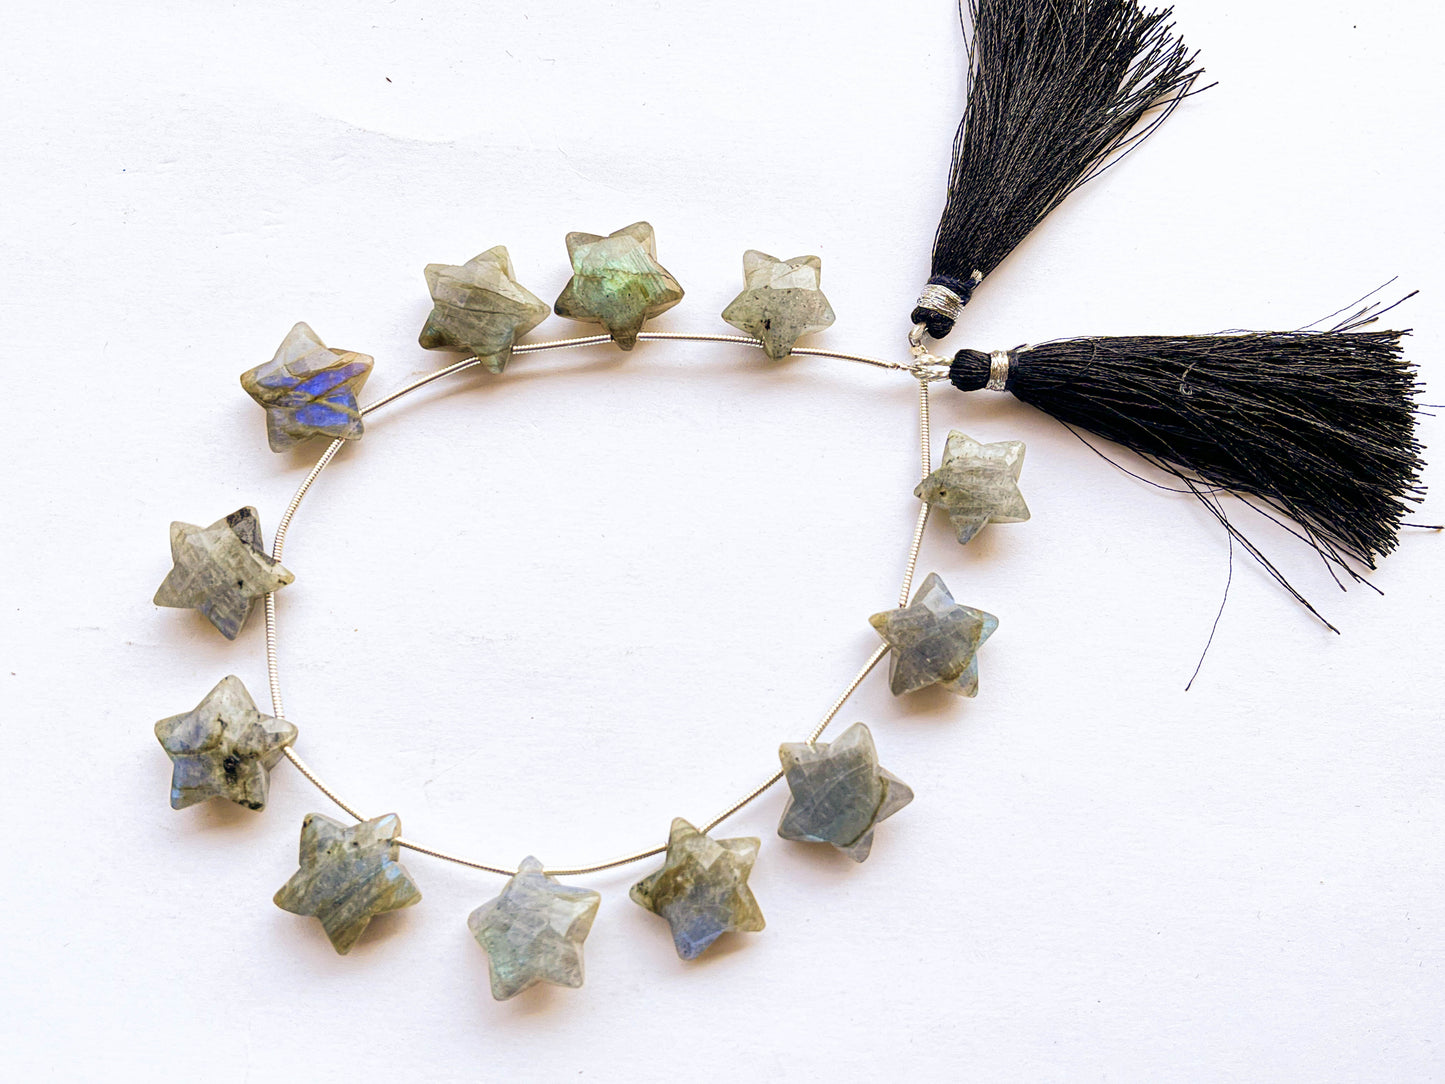 Labradorite Star Shape Faceted Briolette Beads Beadsforyourjewelry